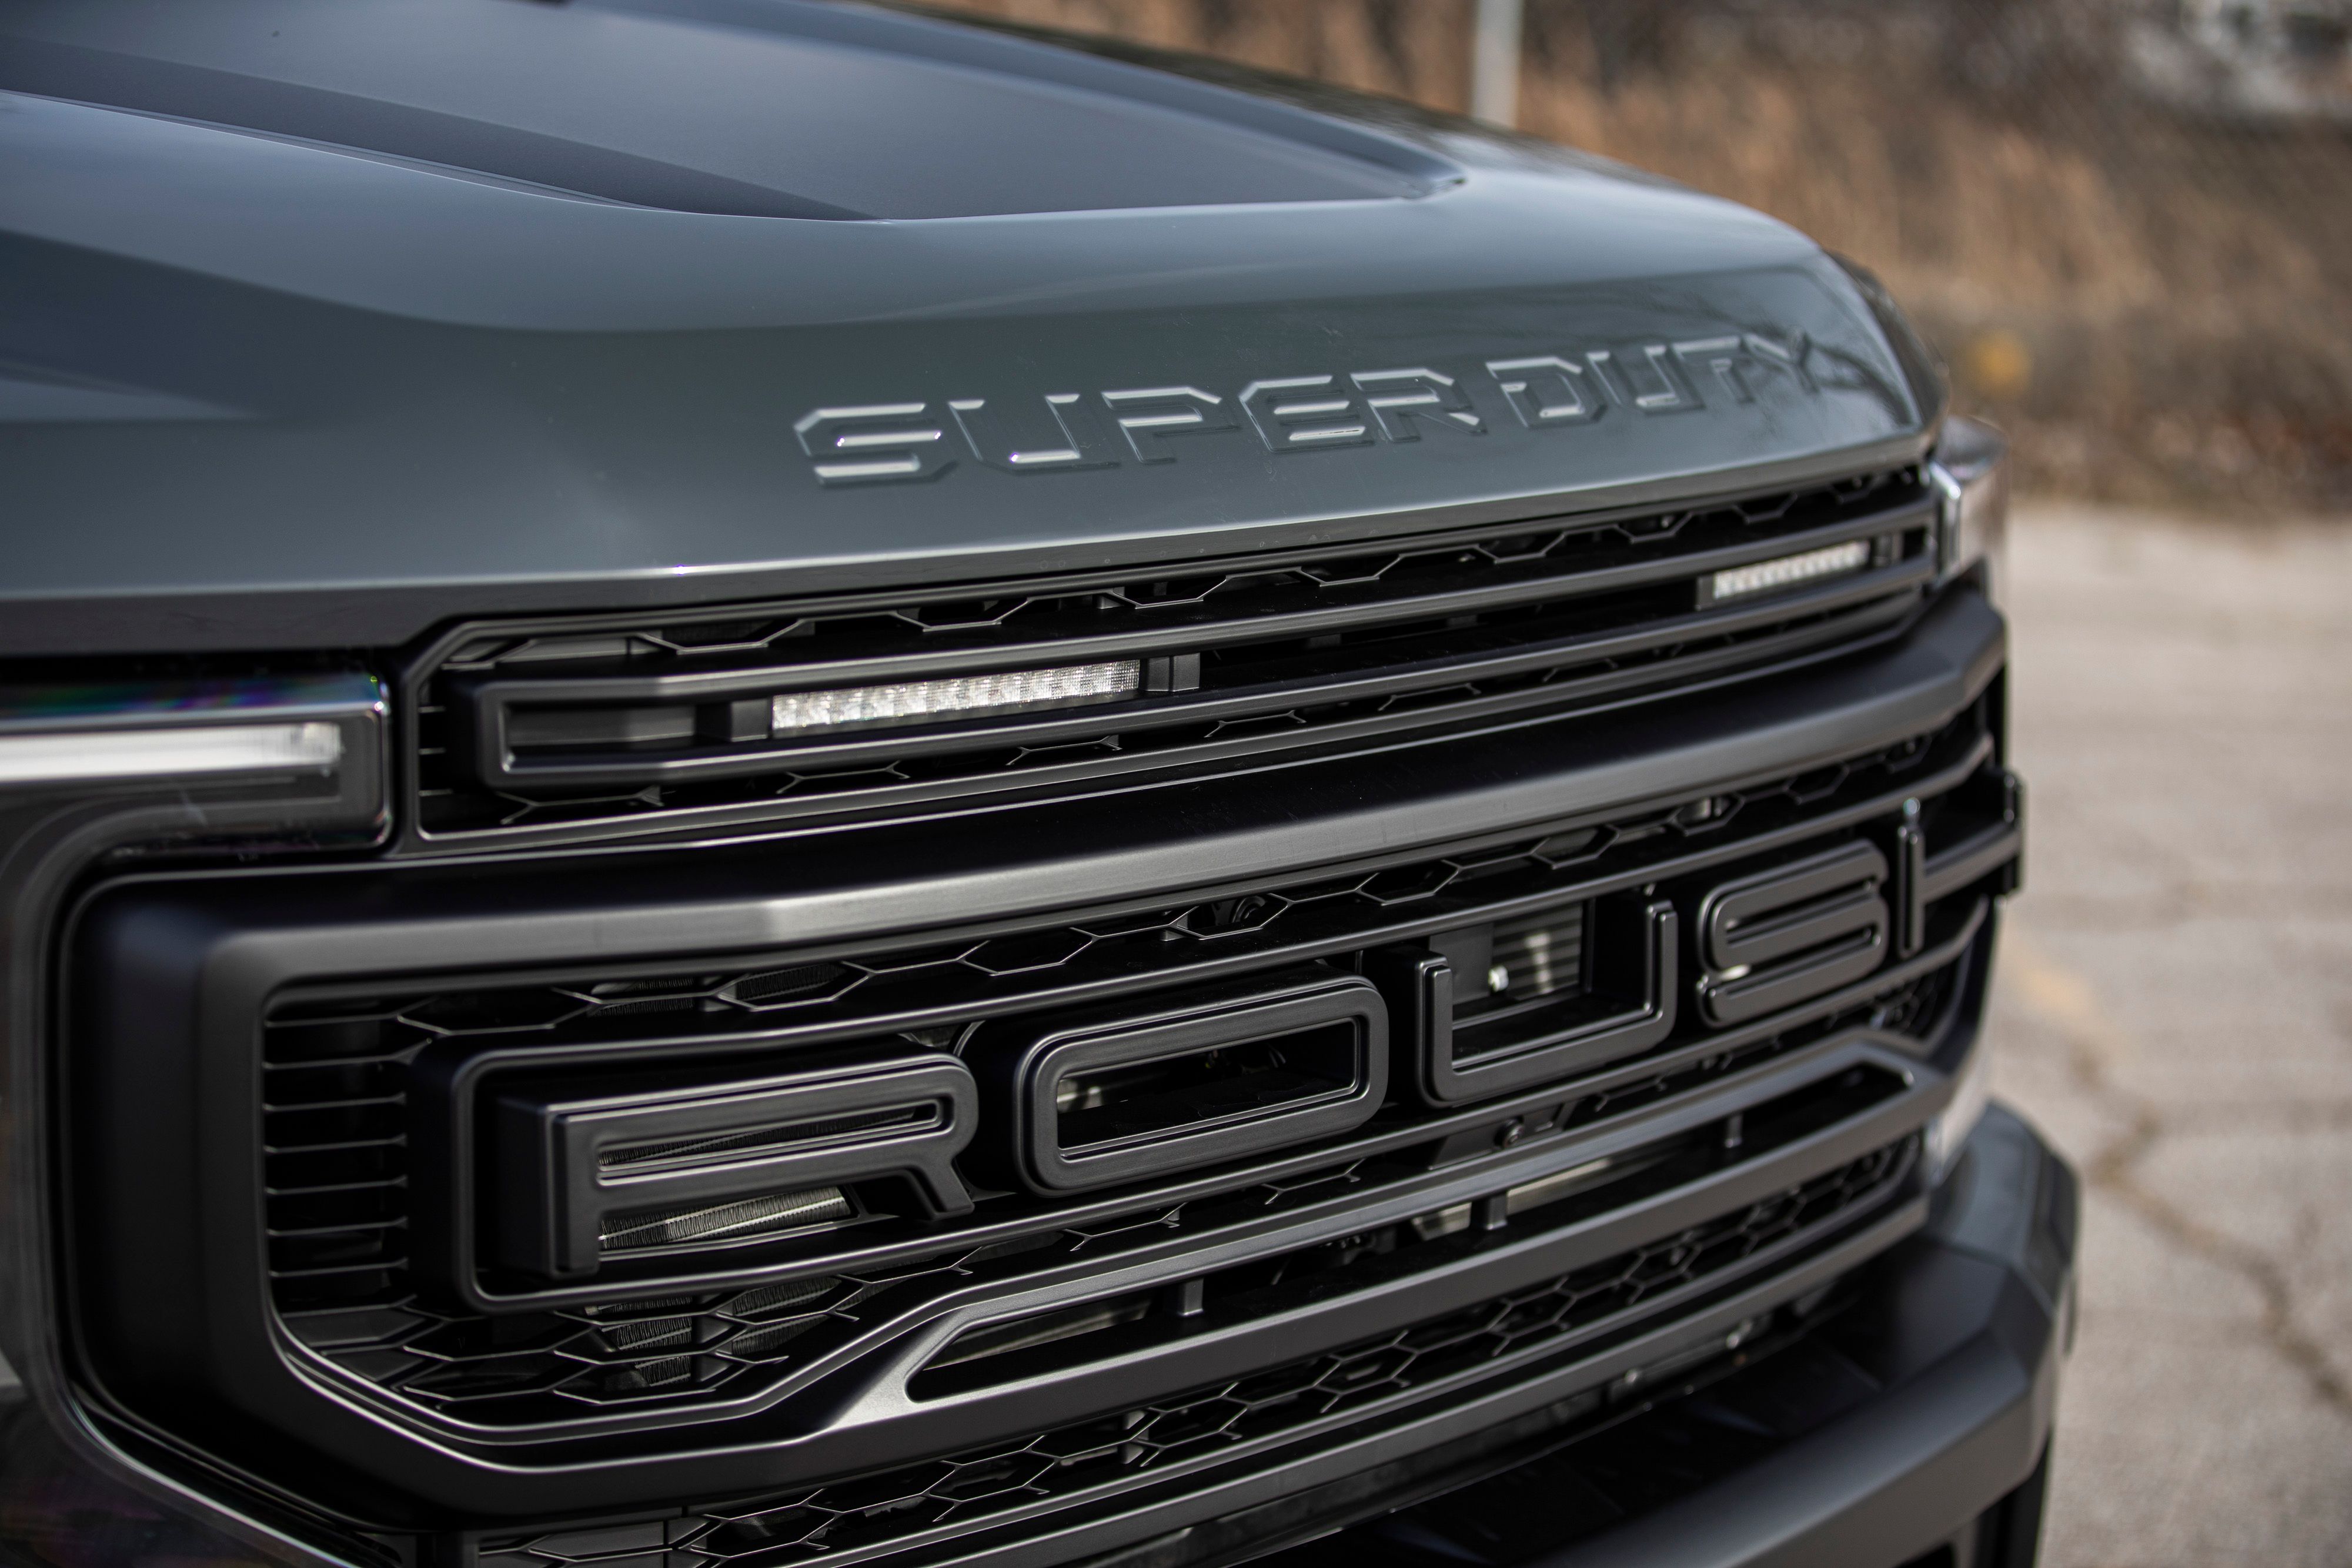 2021 Ford Super Duty By Roush Performance